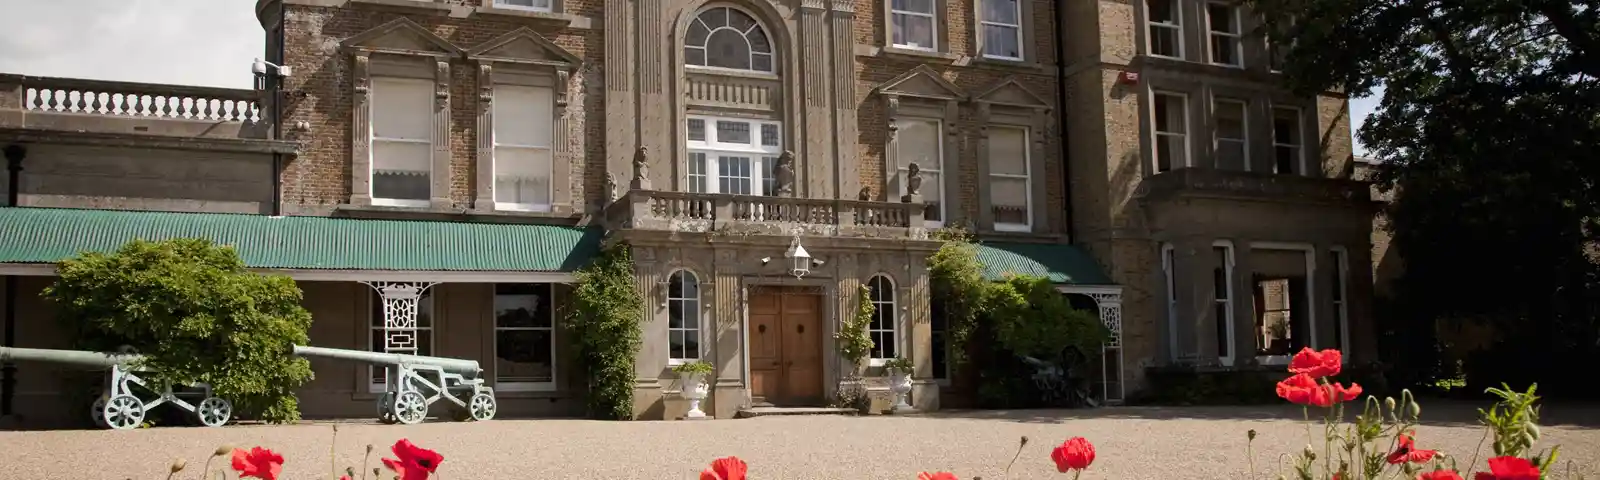 VB Quex house with poppies (L) Gallery 3.jpg